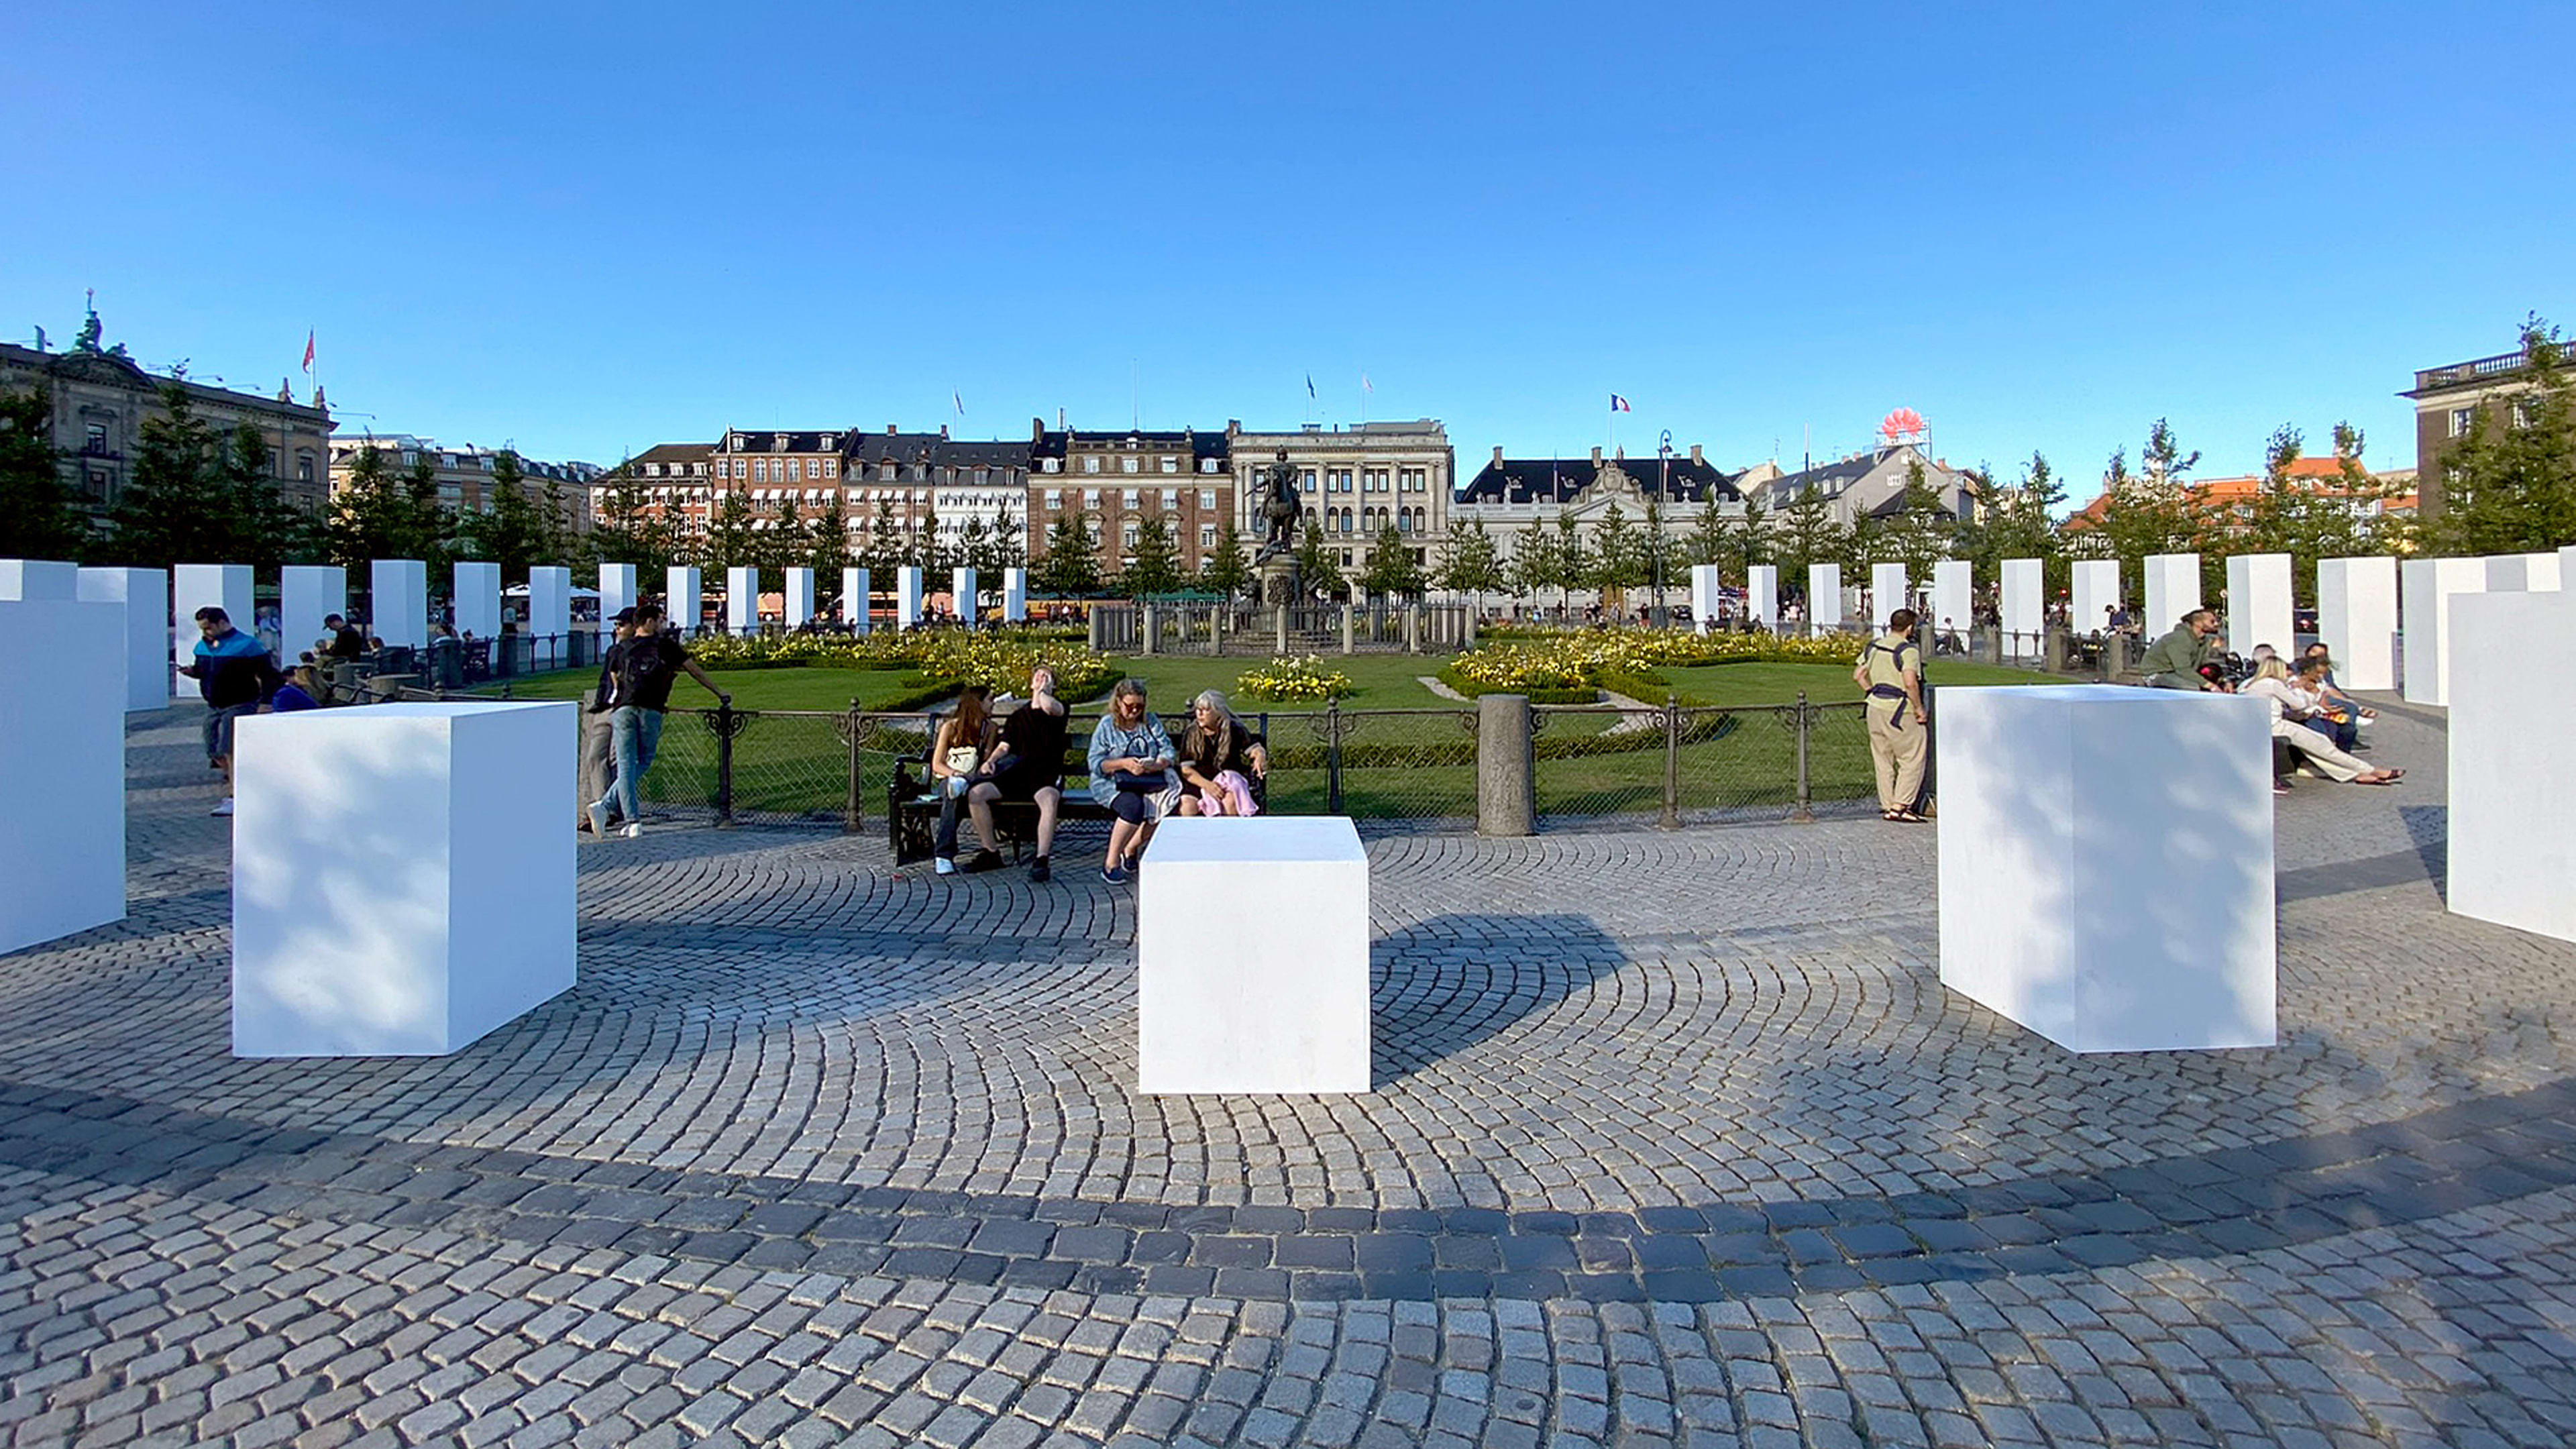 Why Copenhagen has just unveiled 50 pedestals without their statues